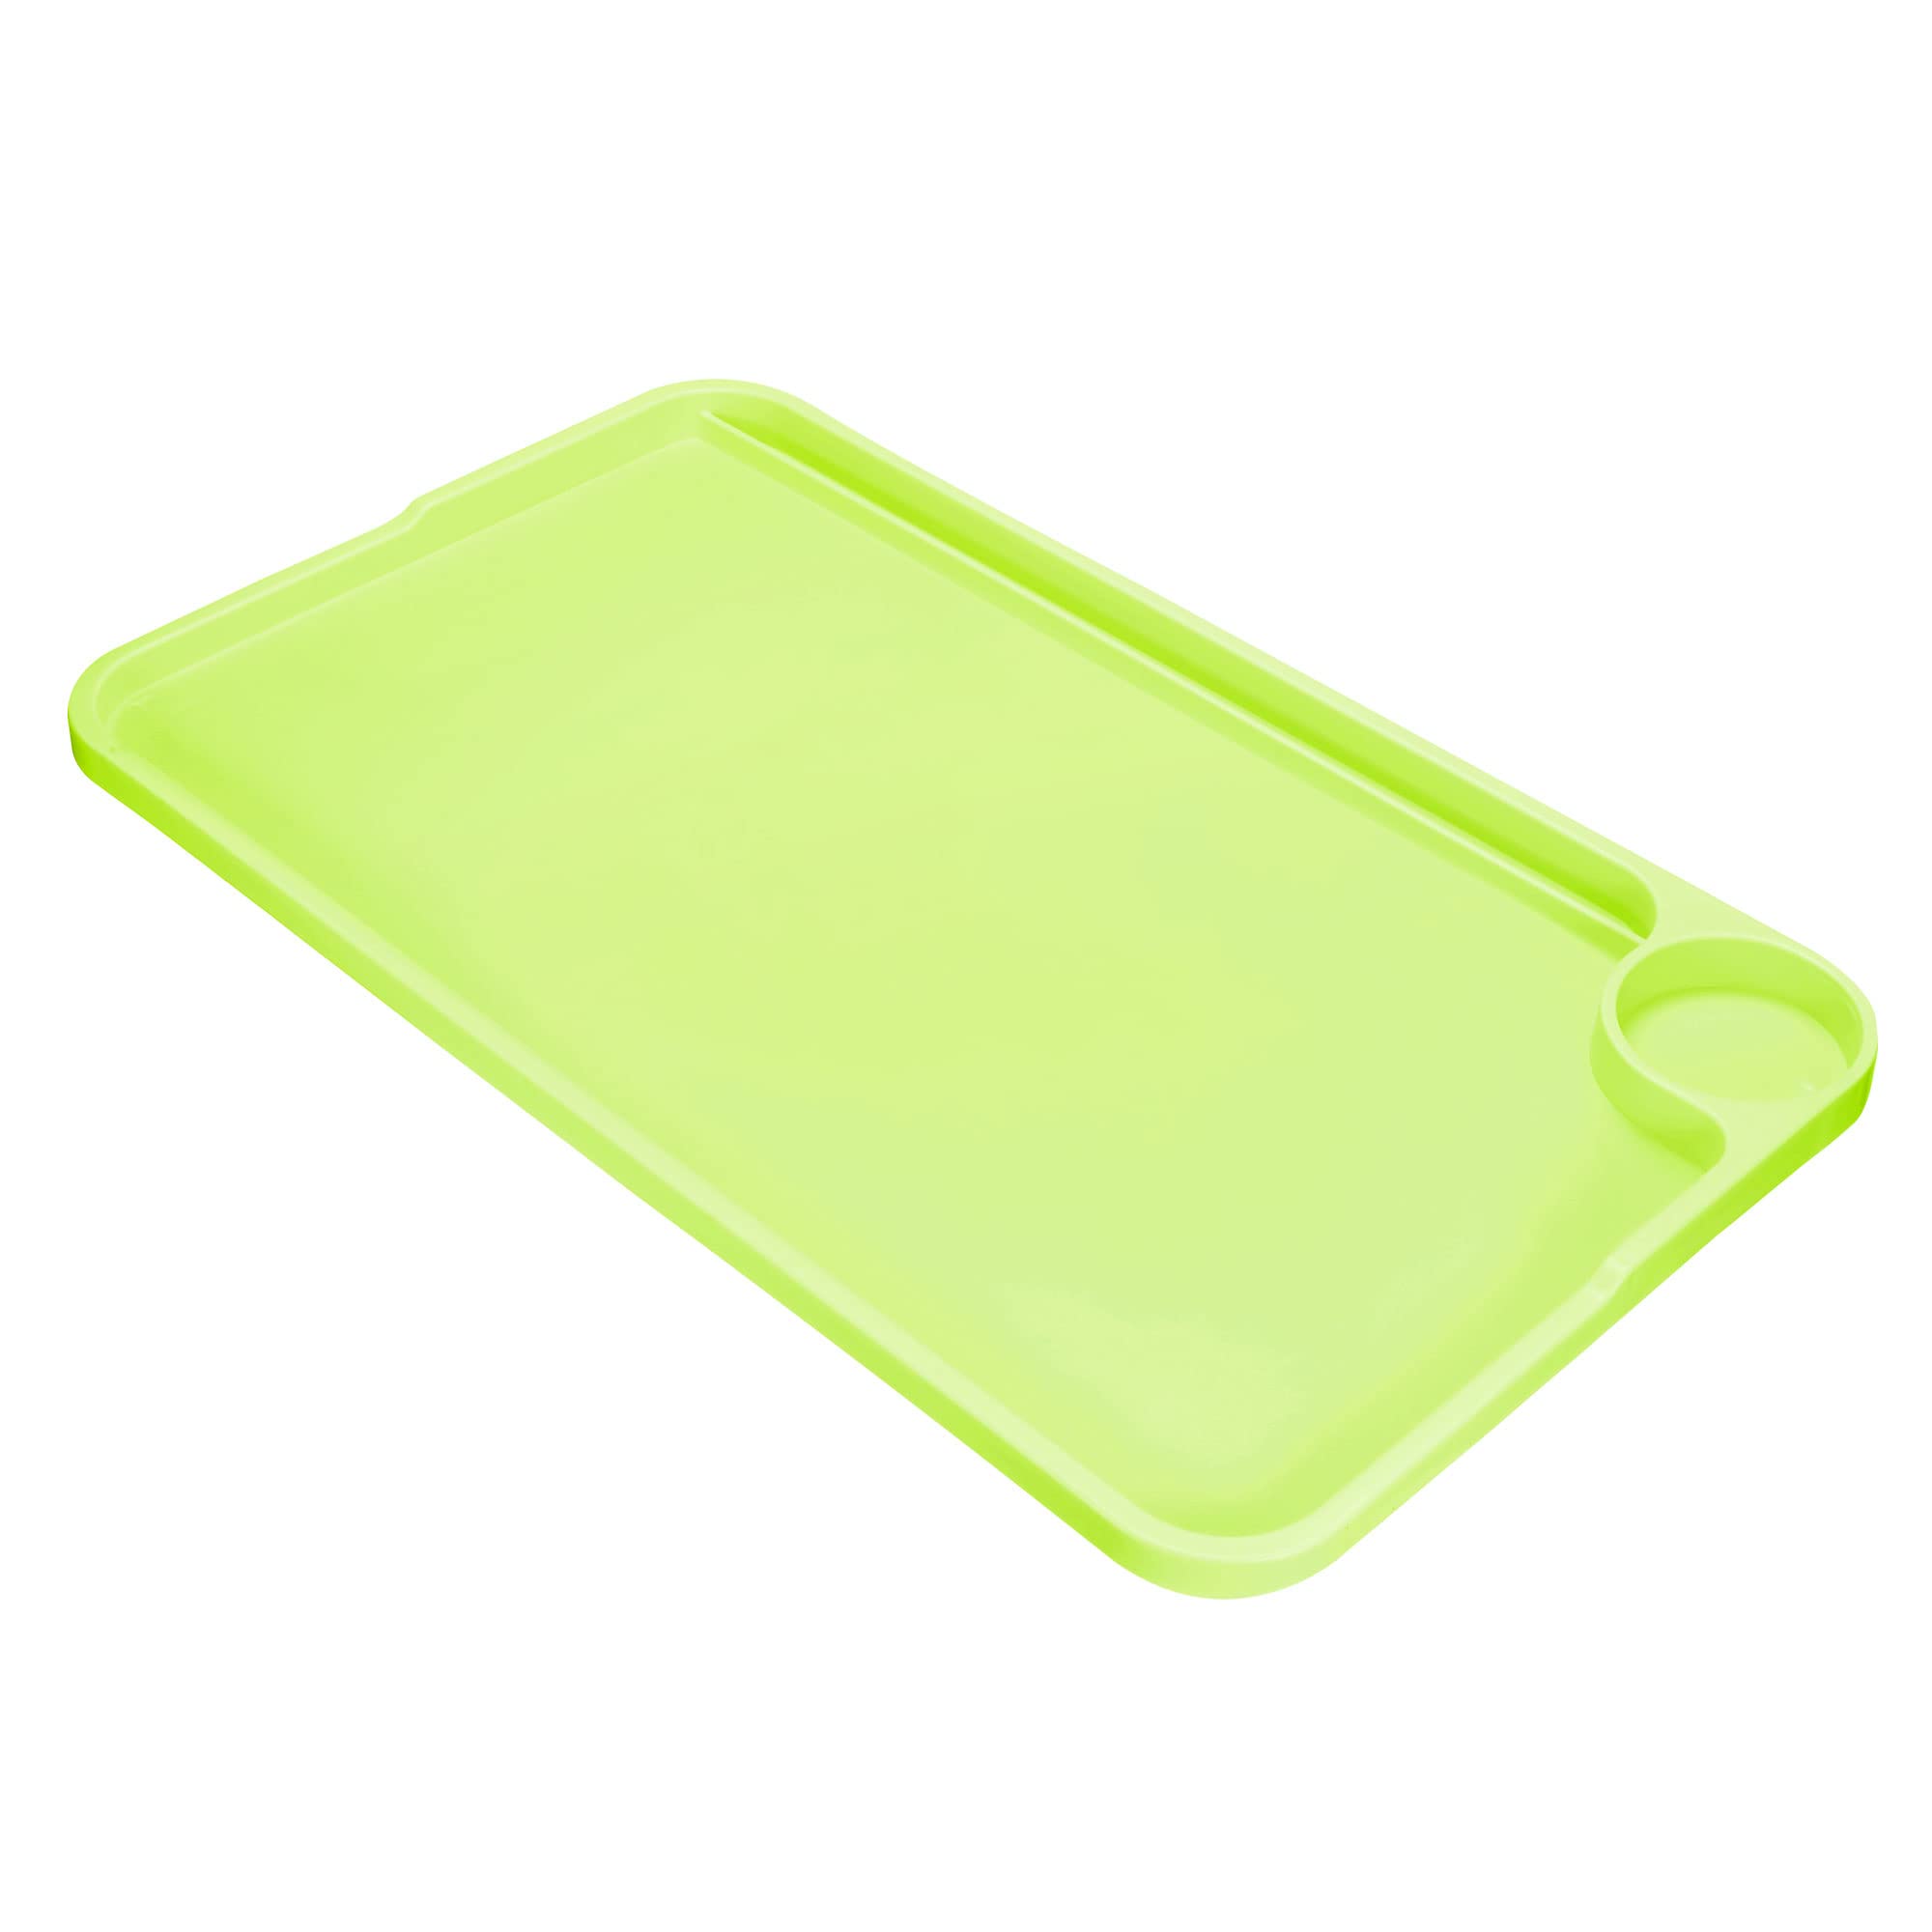 PATIKIL Breakfast Tray Table, Bed Trays with Folding Legs Reusable Serving Platter Laptop Snack Desk for Eating, Green